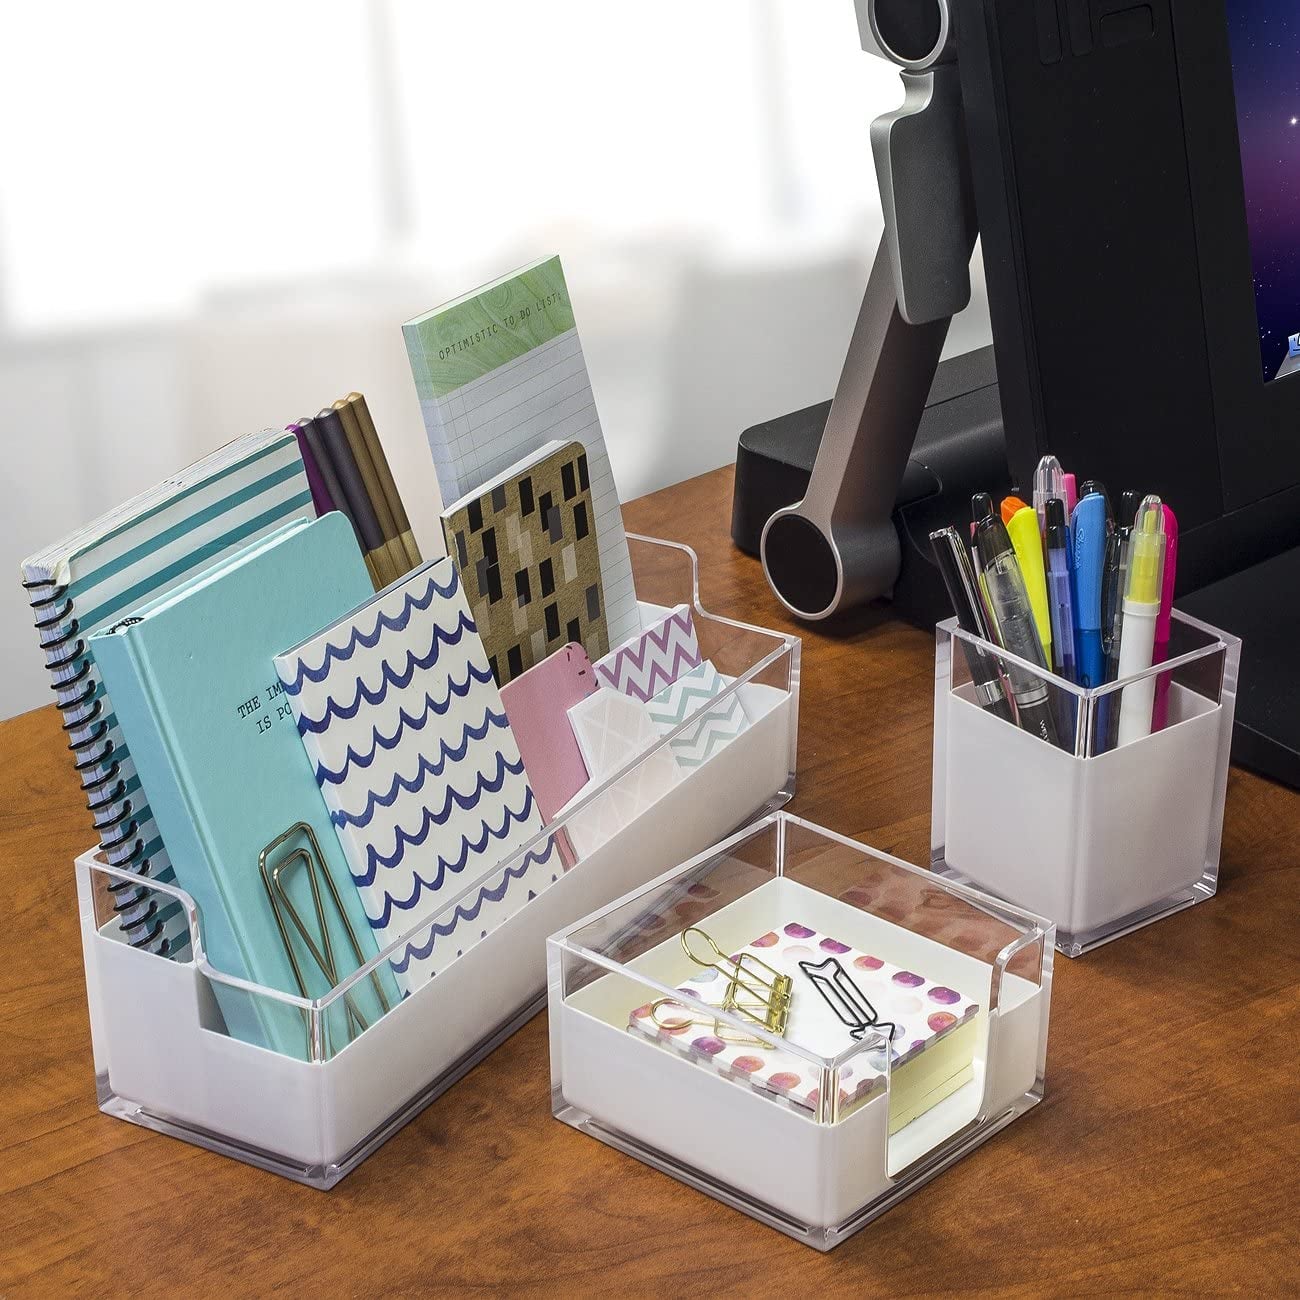 Lamicall - 20 Best Desk Accessories - Learn to Organize Your Desk